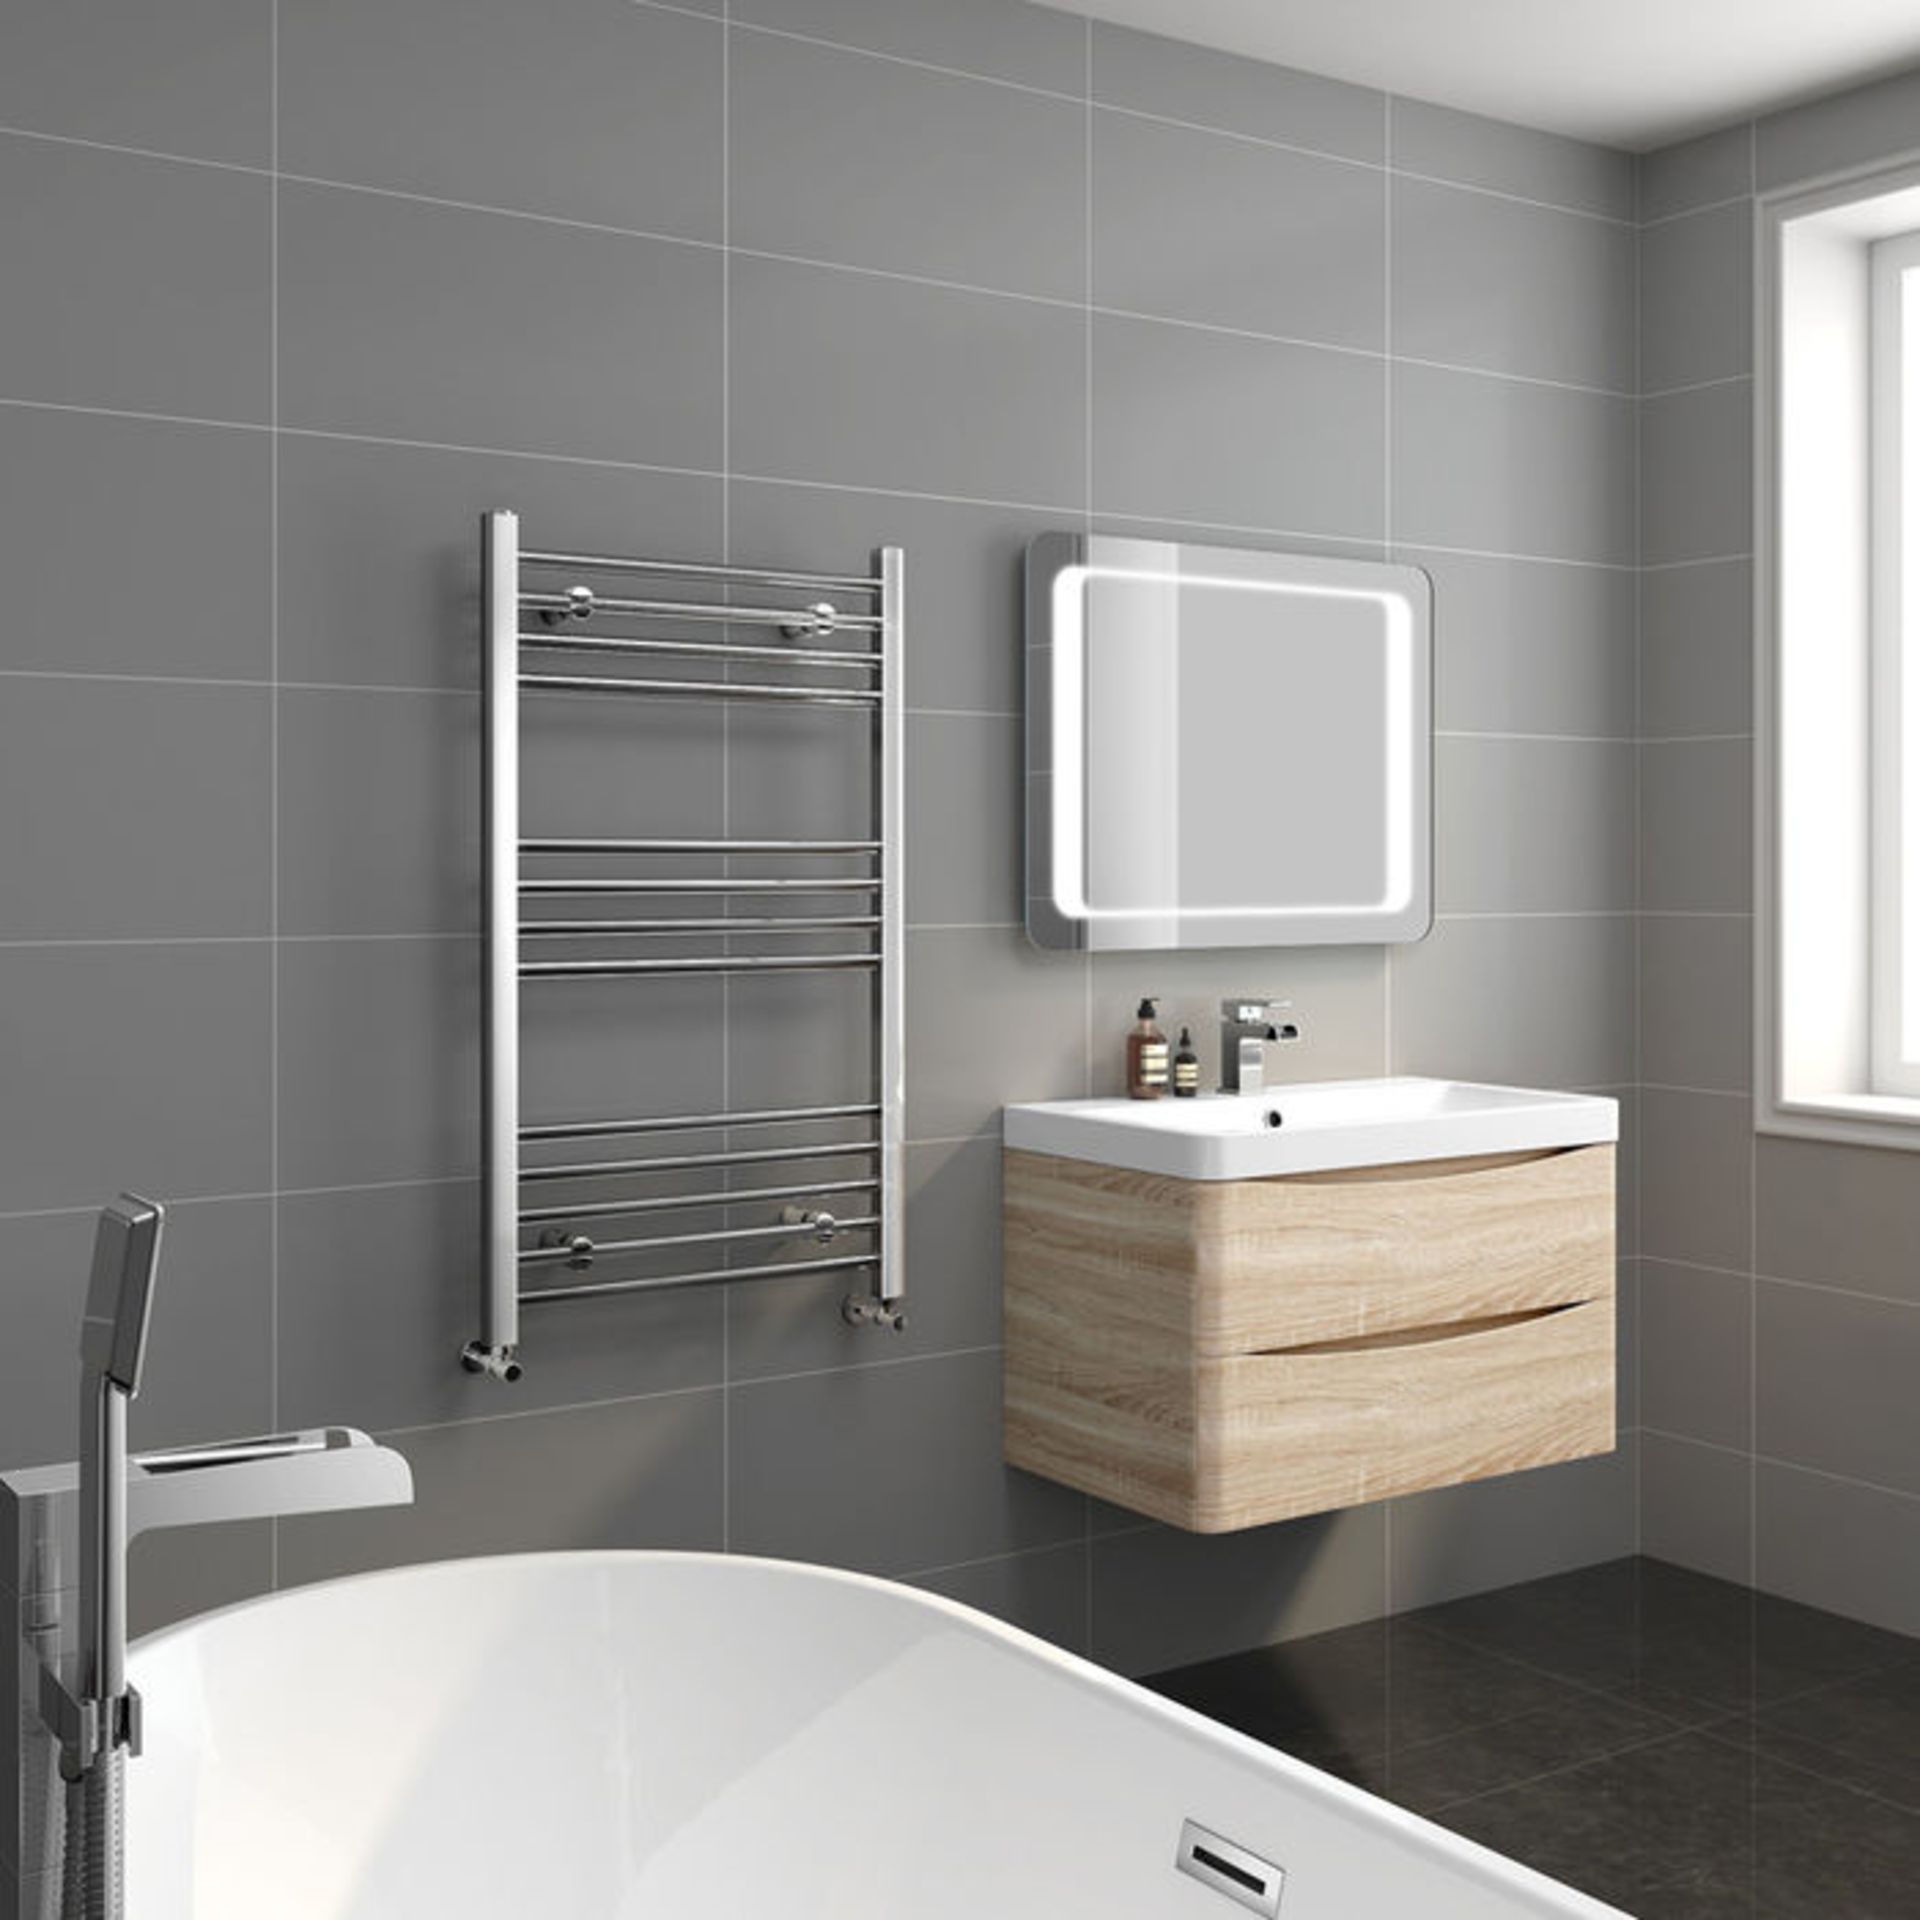 (S139) 1000x600mm - 20mm Tubes - Chrome Heated Straight Rail Ladder Towel Radiator. Low carbon steel - Image 2 of 3